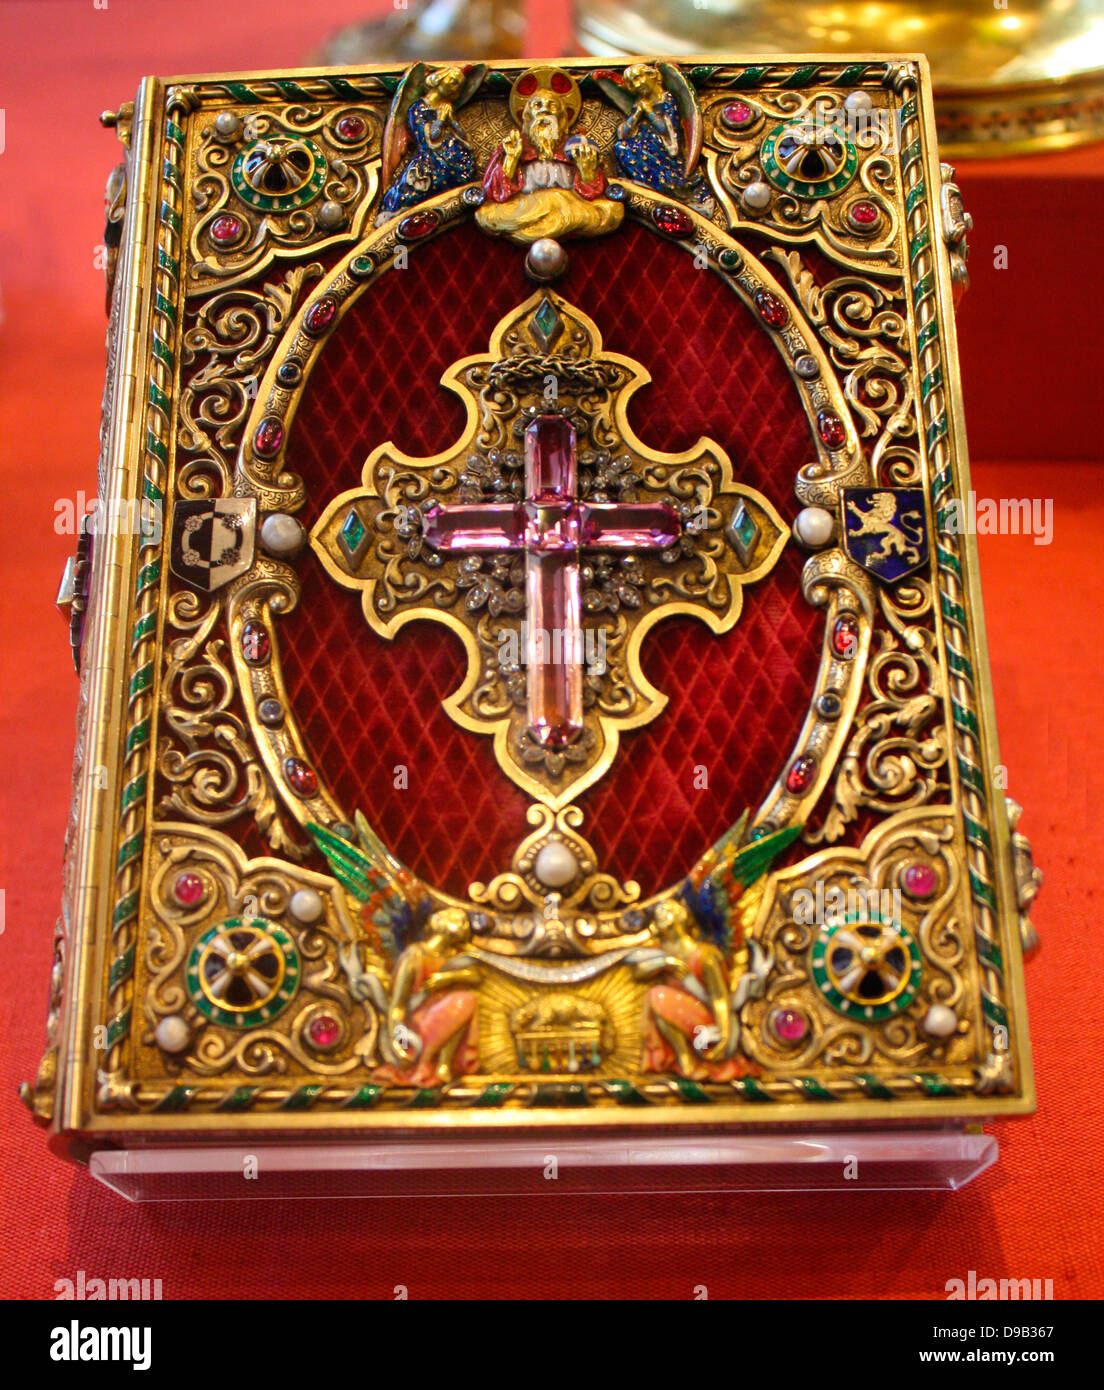 Book of Hours, Silver-gilt, gold, velvet, enamel, rubies, sapphires, emeralds, diamonds and pearls.  Paris, 1828-1842.  The book of hours is a fully illuminated manuscript on vellum, imitating late medieval examples.  It was made in Paris for Louis Jules Gallois, Comte de Naives. Stock Photo